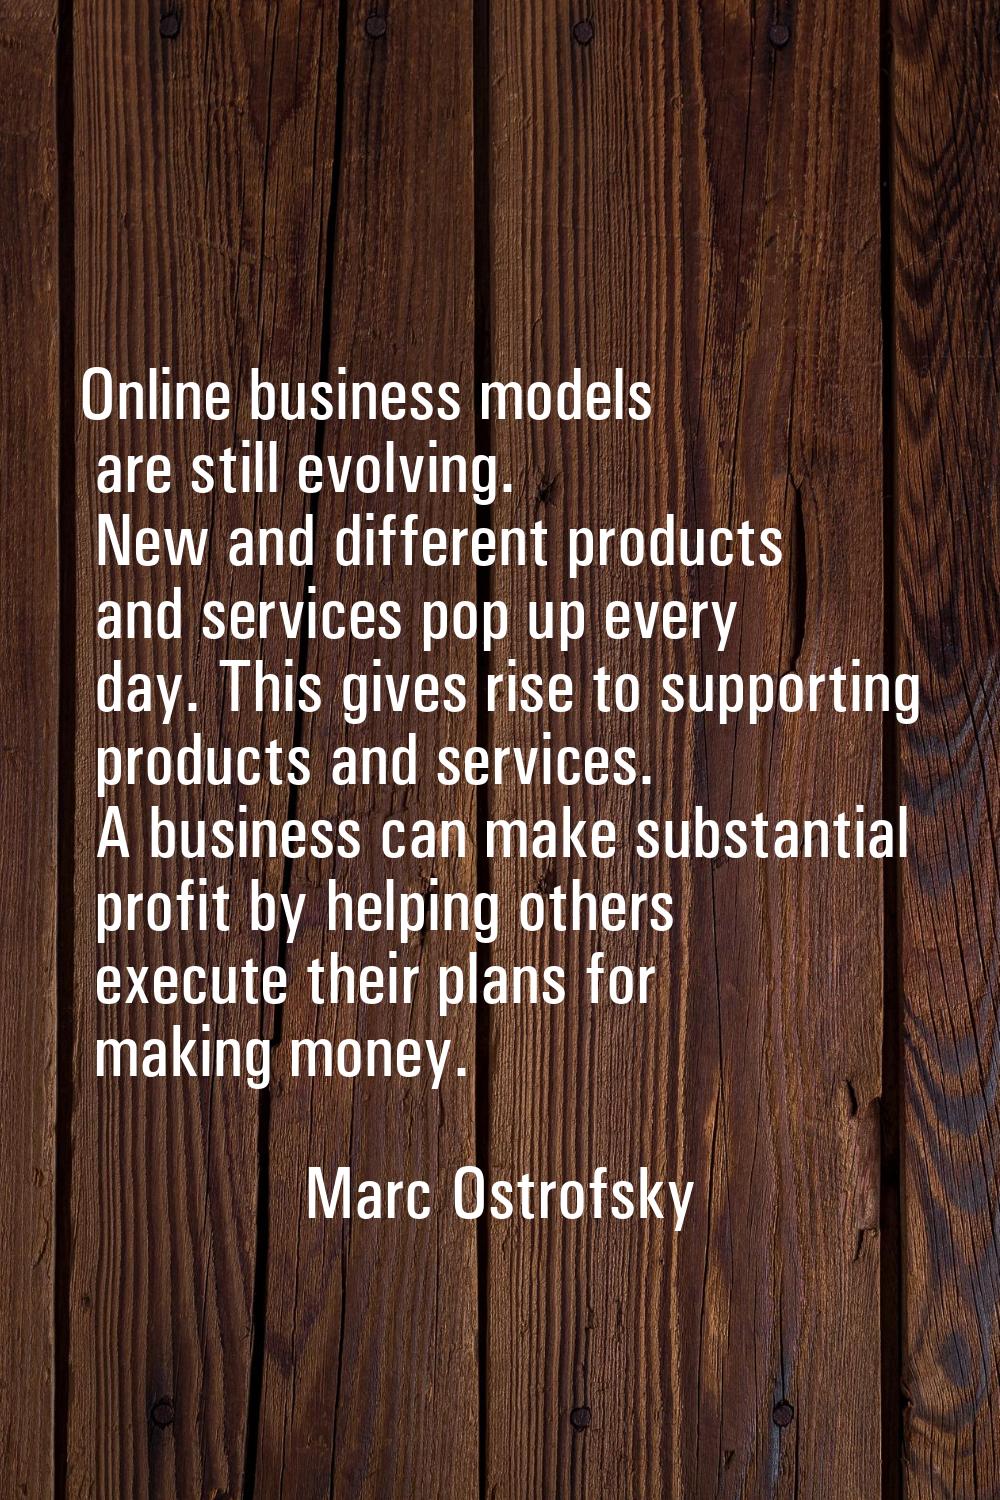 Online business models are still evolving. New and different products and services pop up every day